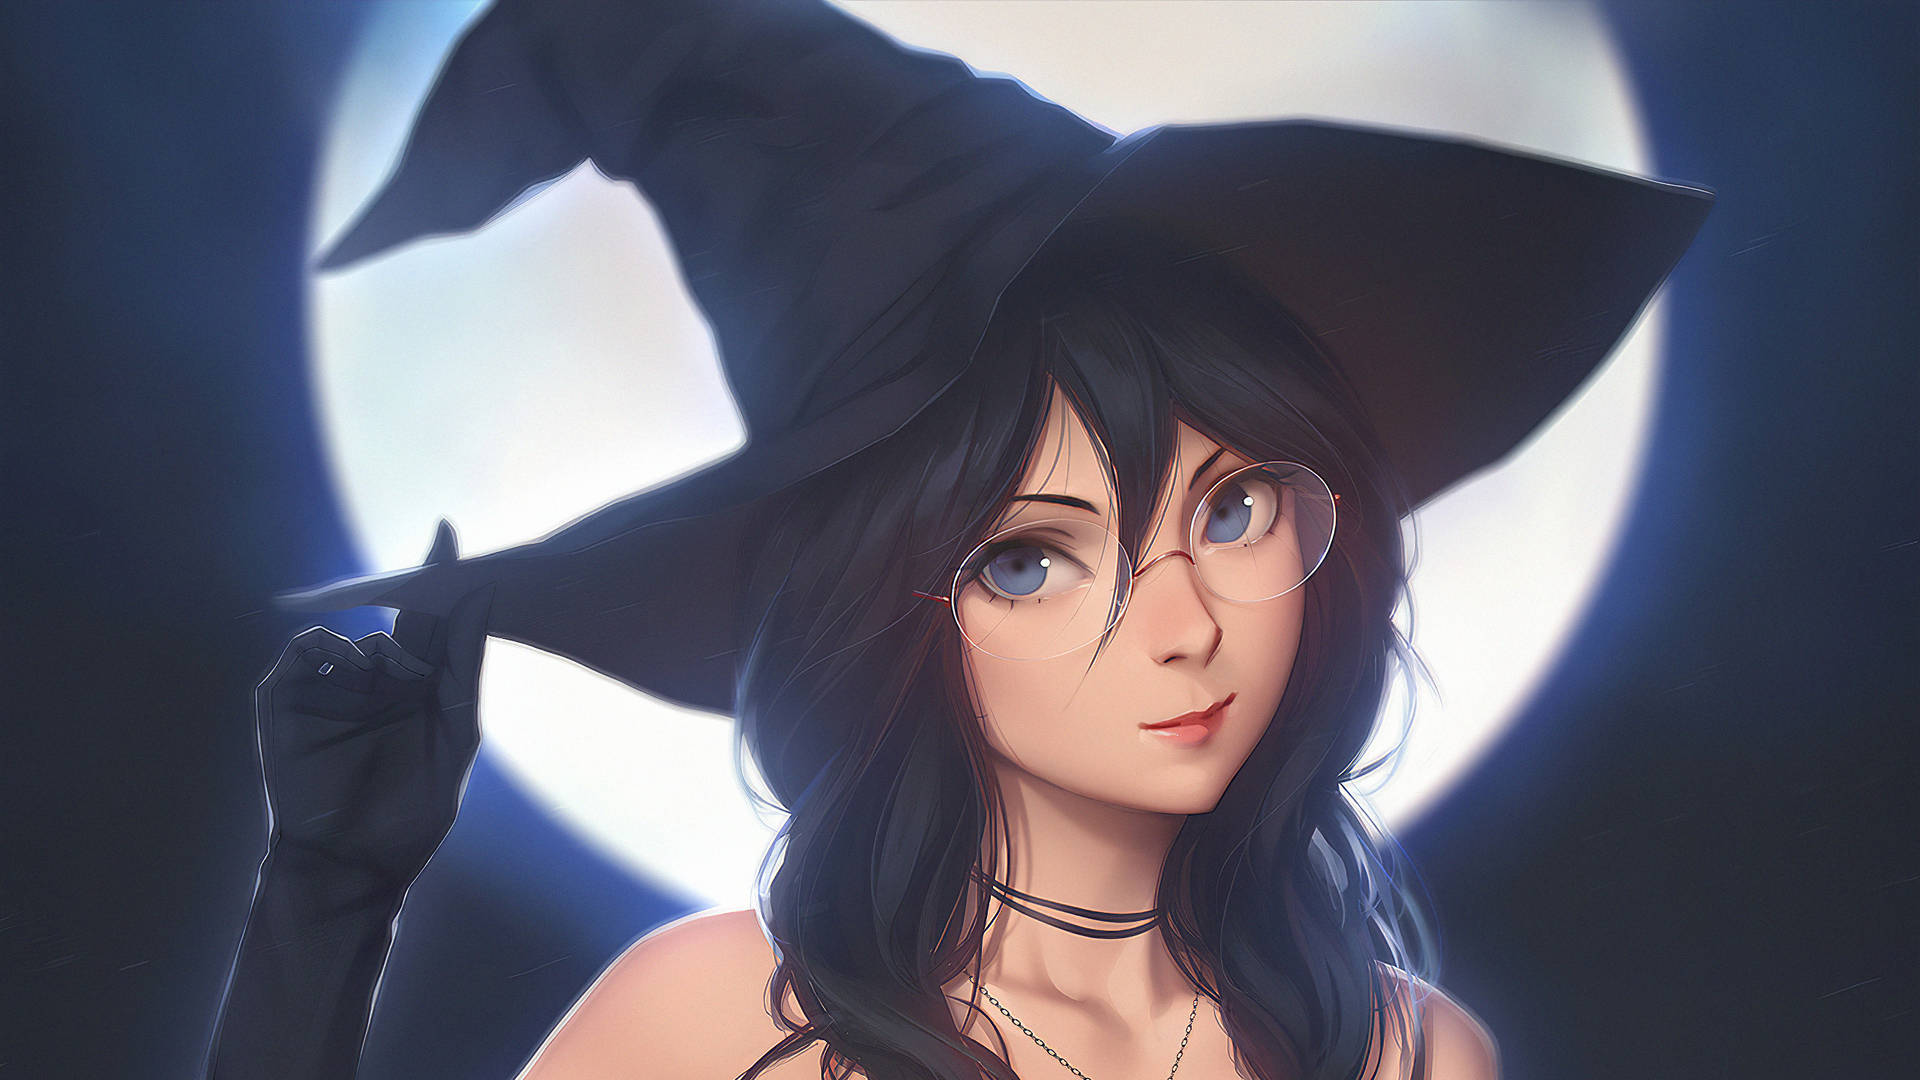 Witchy Eyeglasses Wallpaper